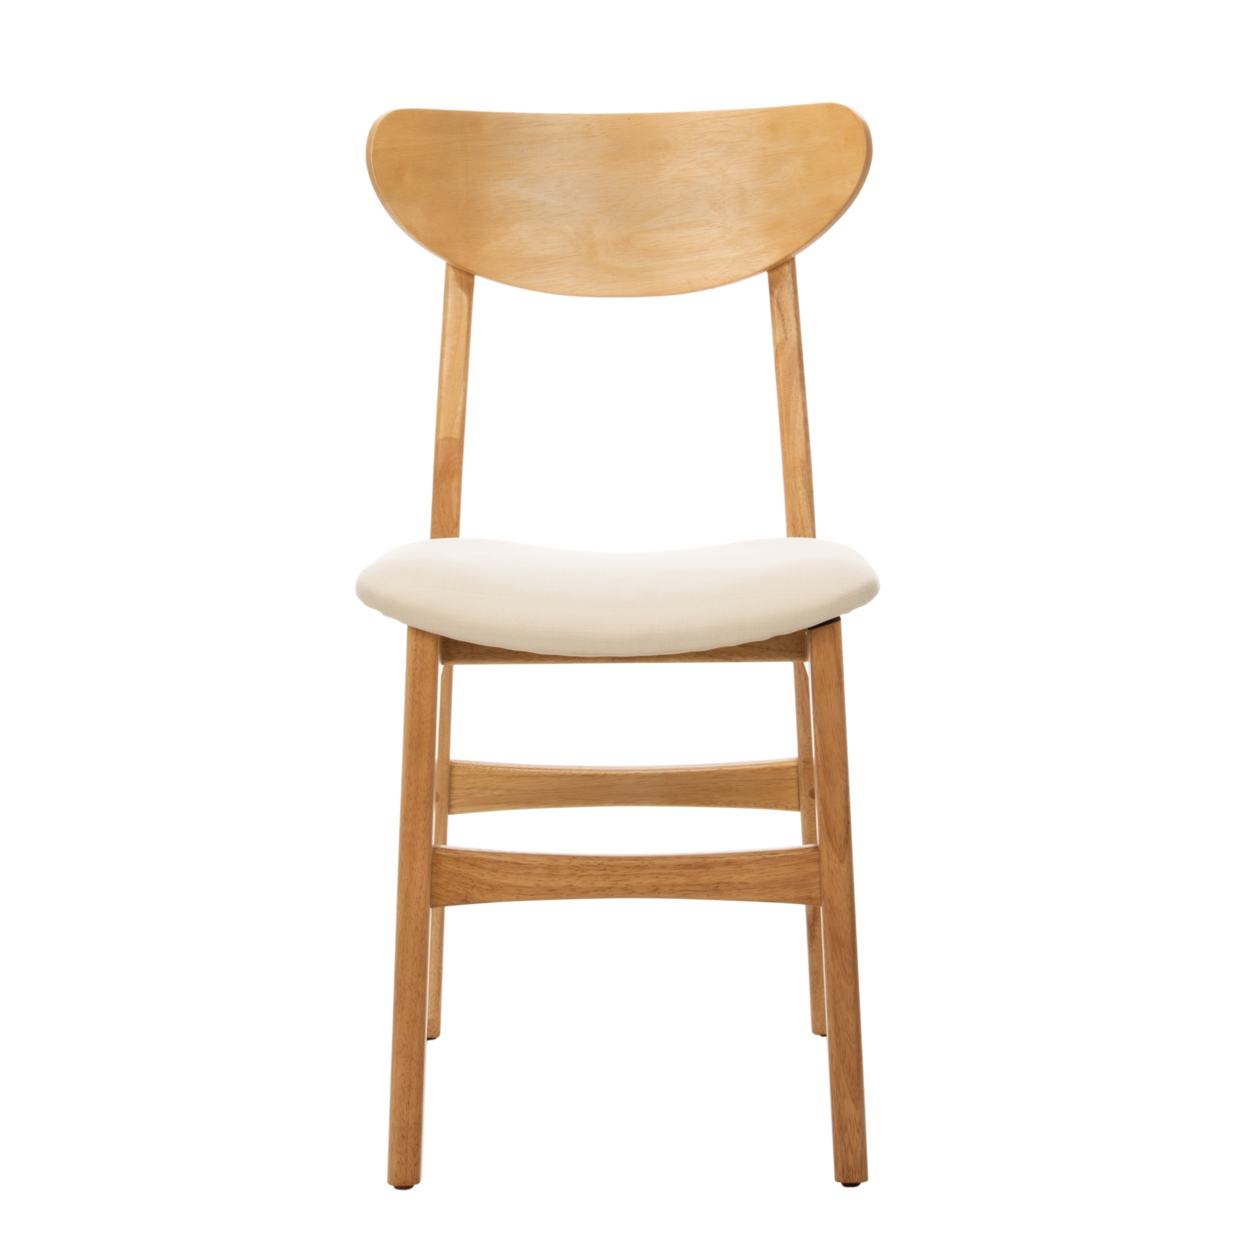 SAFAVIEH Lucca Retro Dining Chair Set Of 2 Natural / White